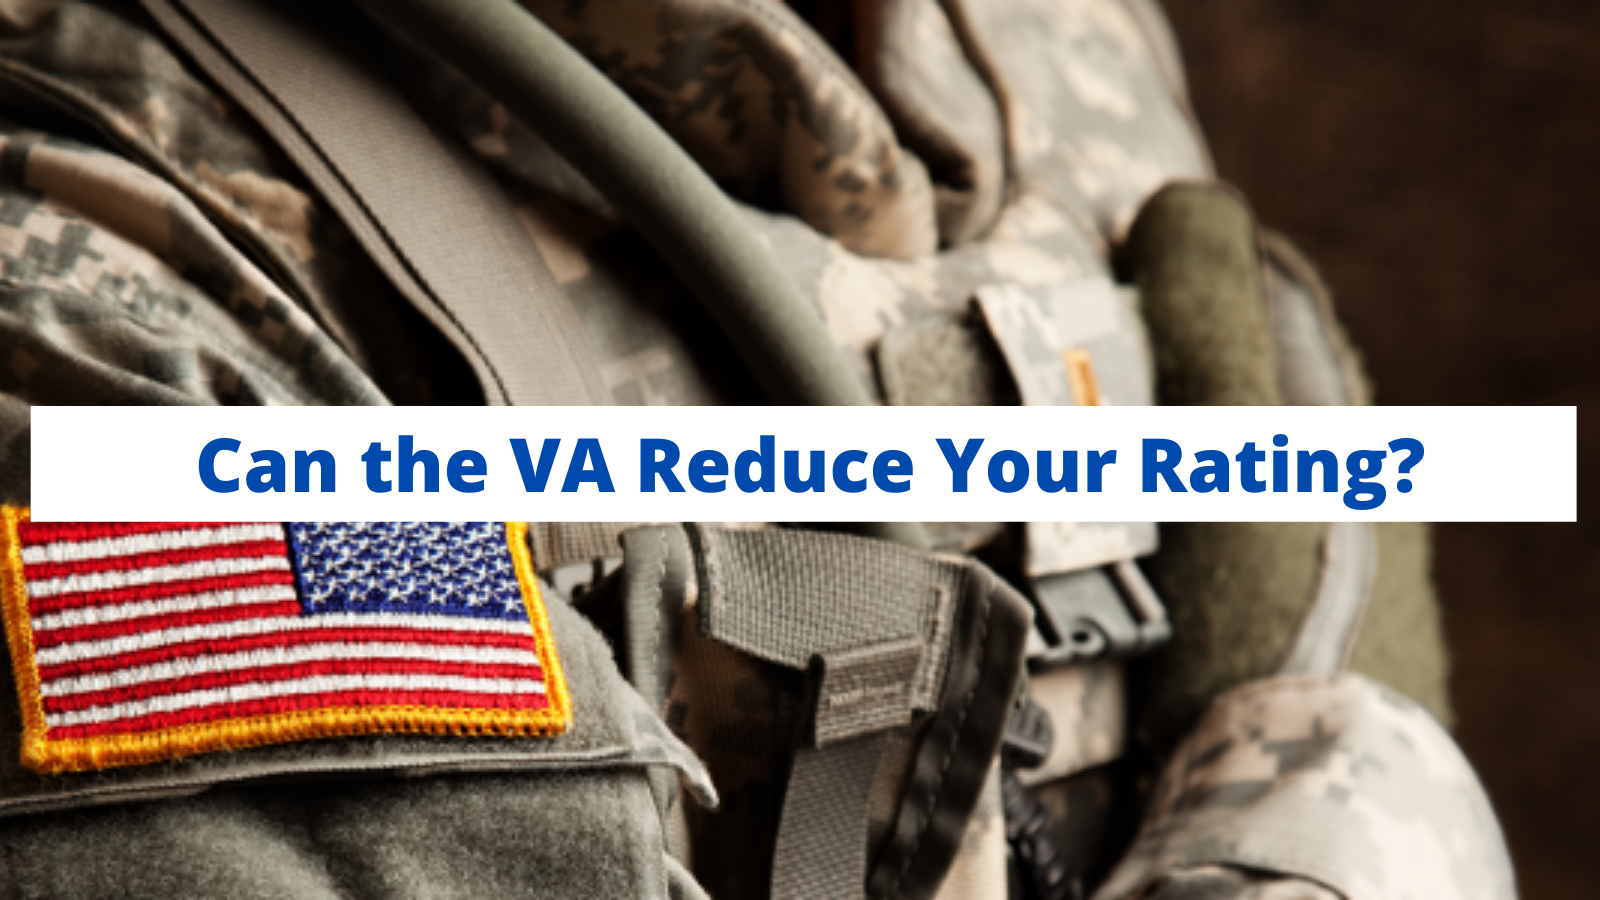 Can the VA Reduce Your Rating?